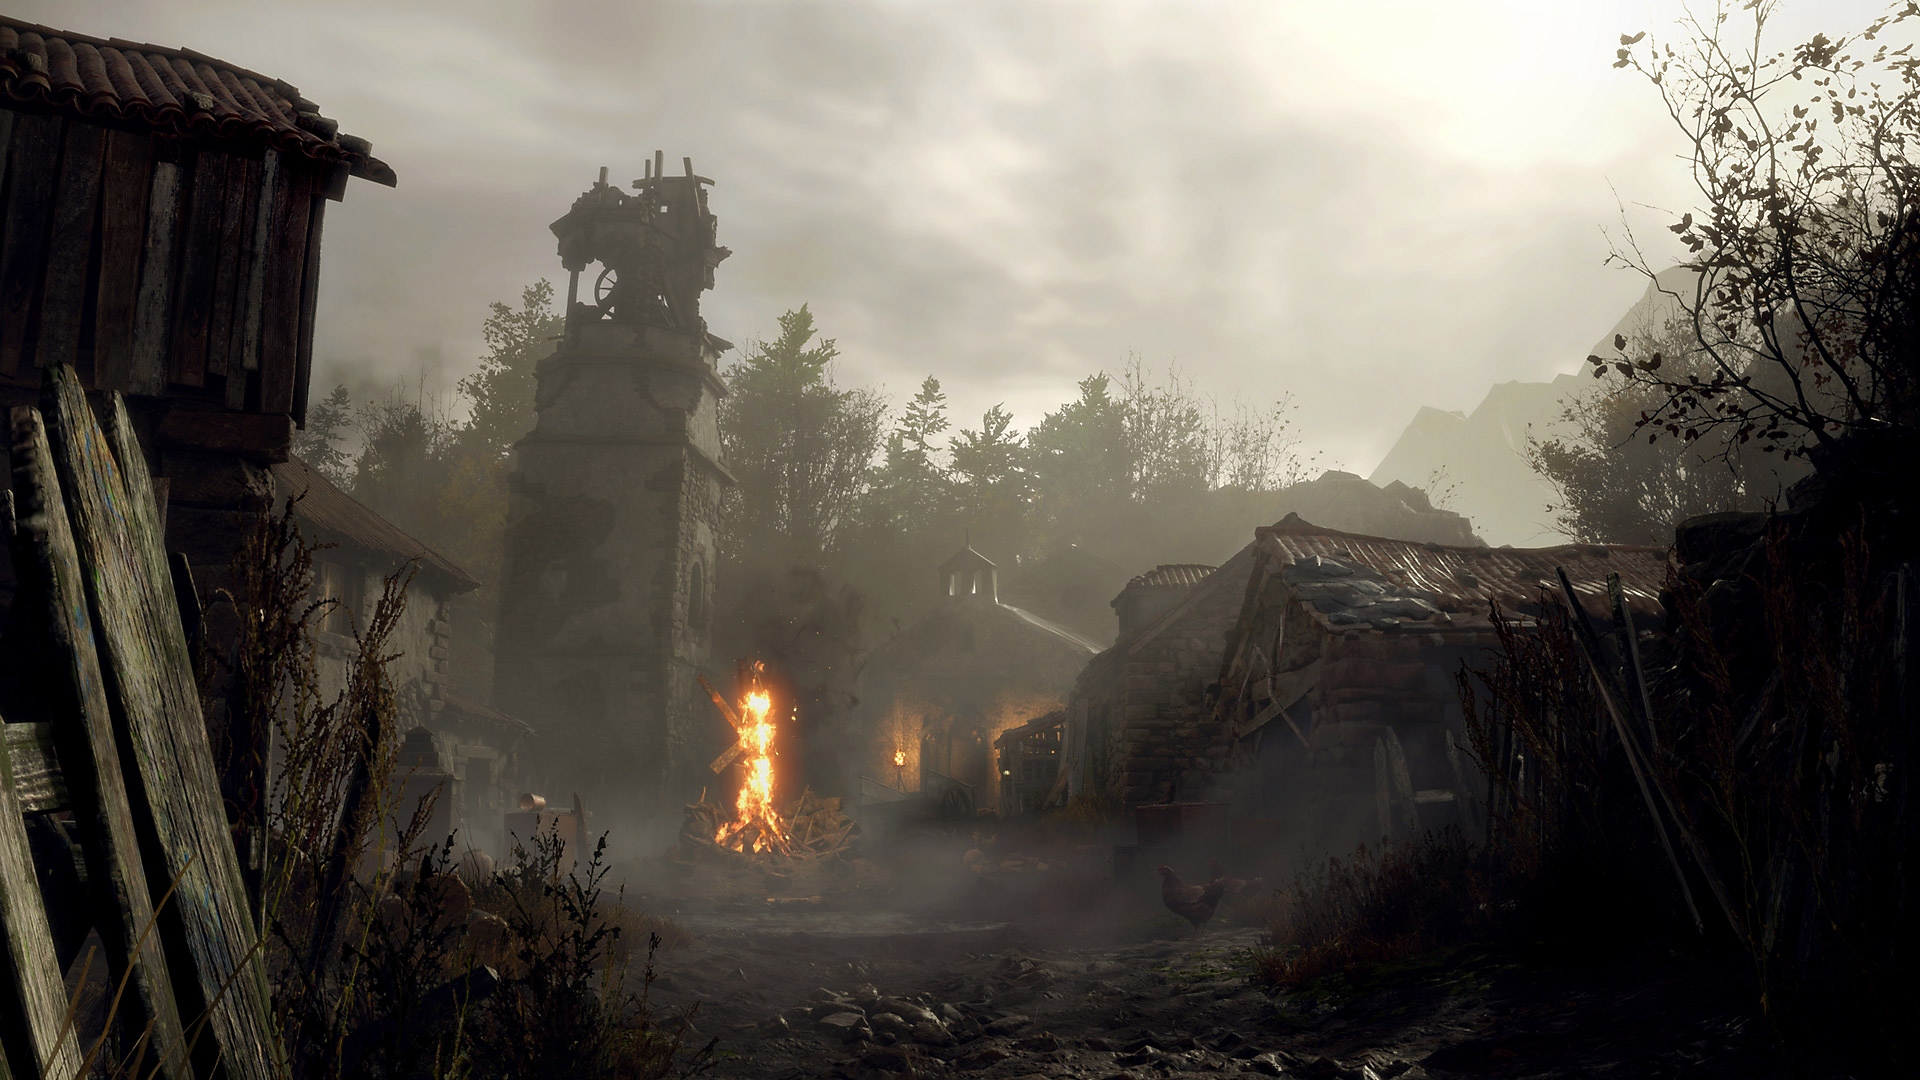 Resident Evil 4 screenshot featuring a burning crucifix in a dusty dilapidated village.